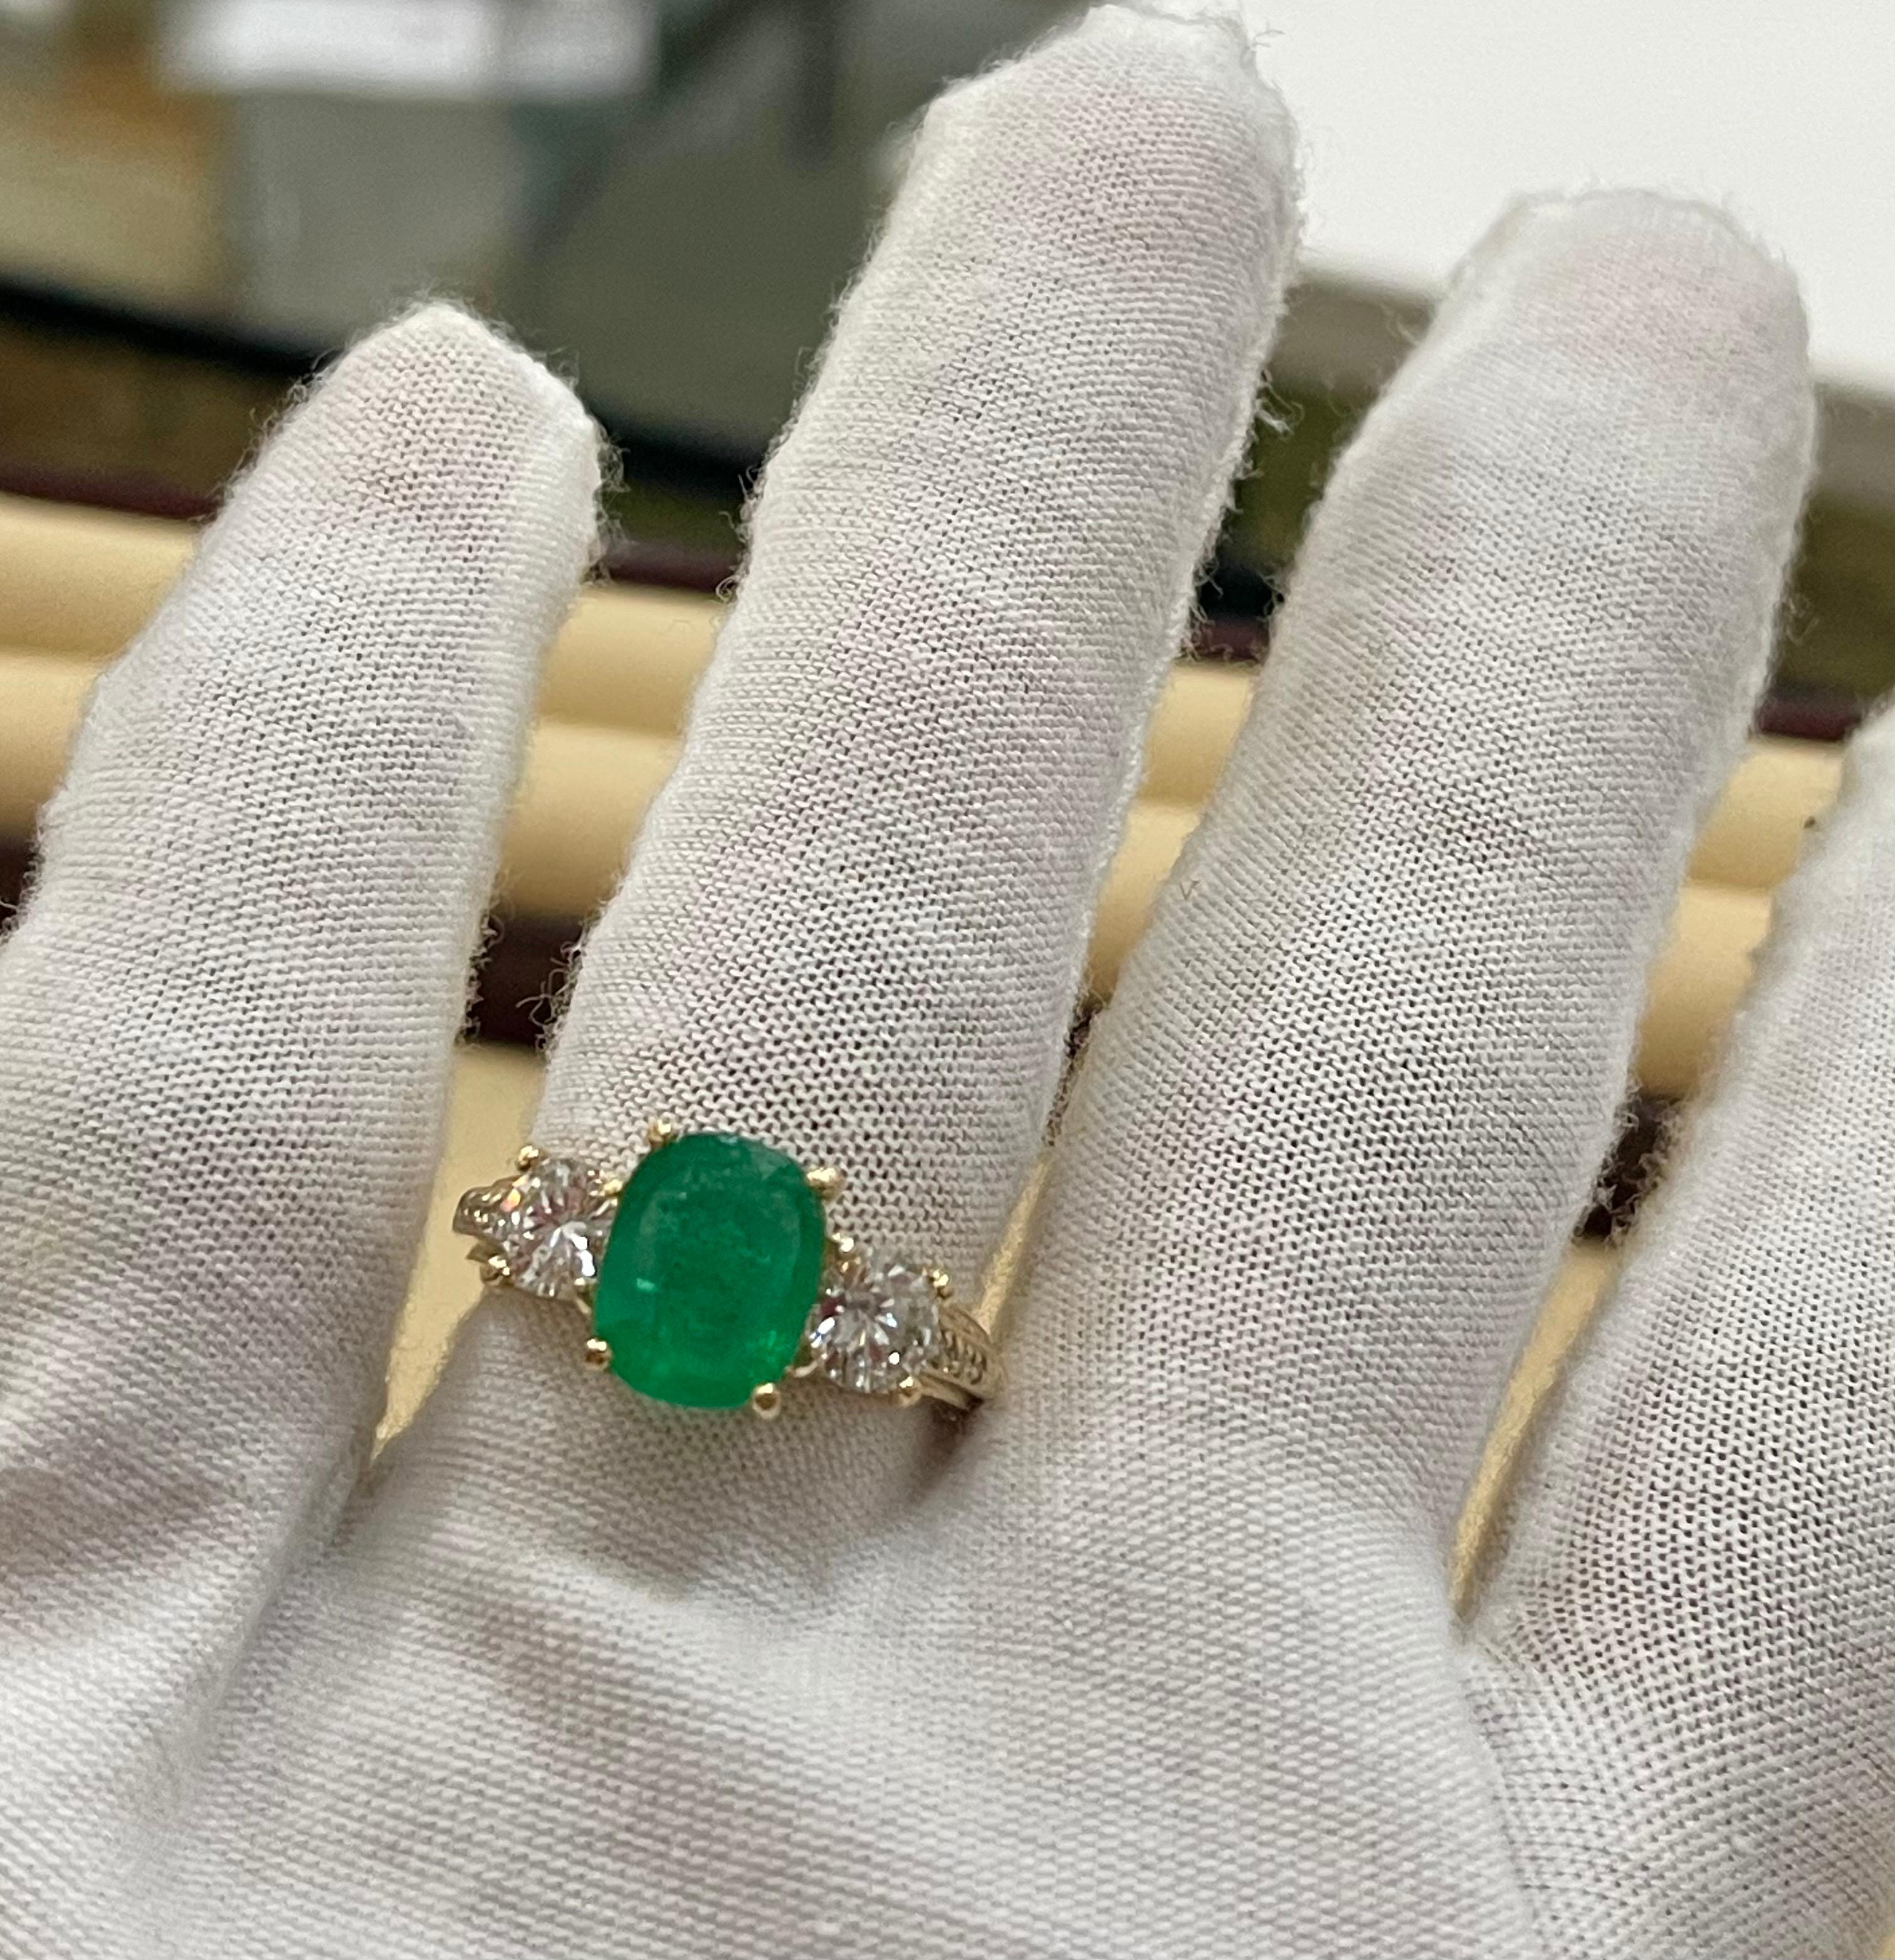 3 Carat Natural Cushion Cut Emerald & 2 Solitaire Diamond Ring 14 Kt Yellow Gold For Sale 10